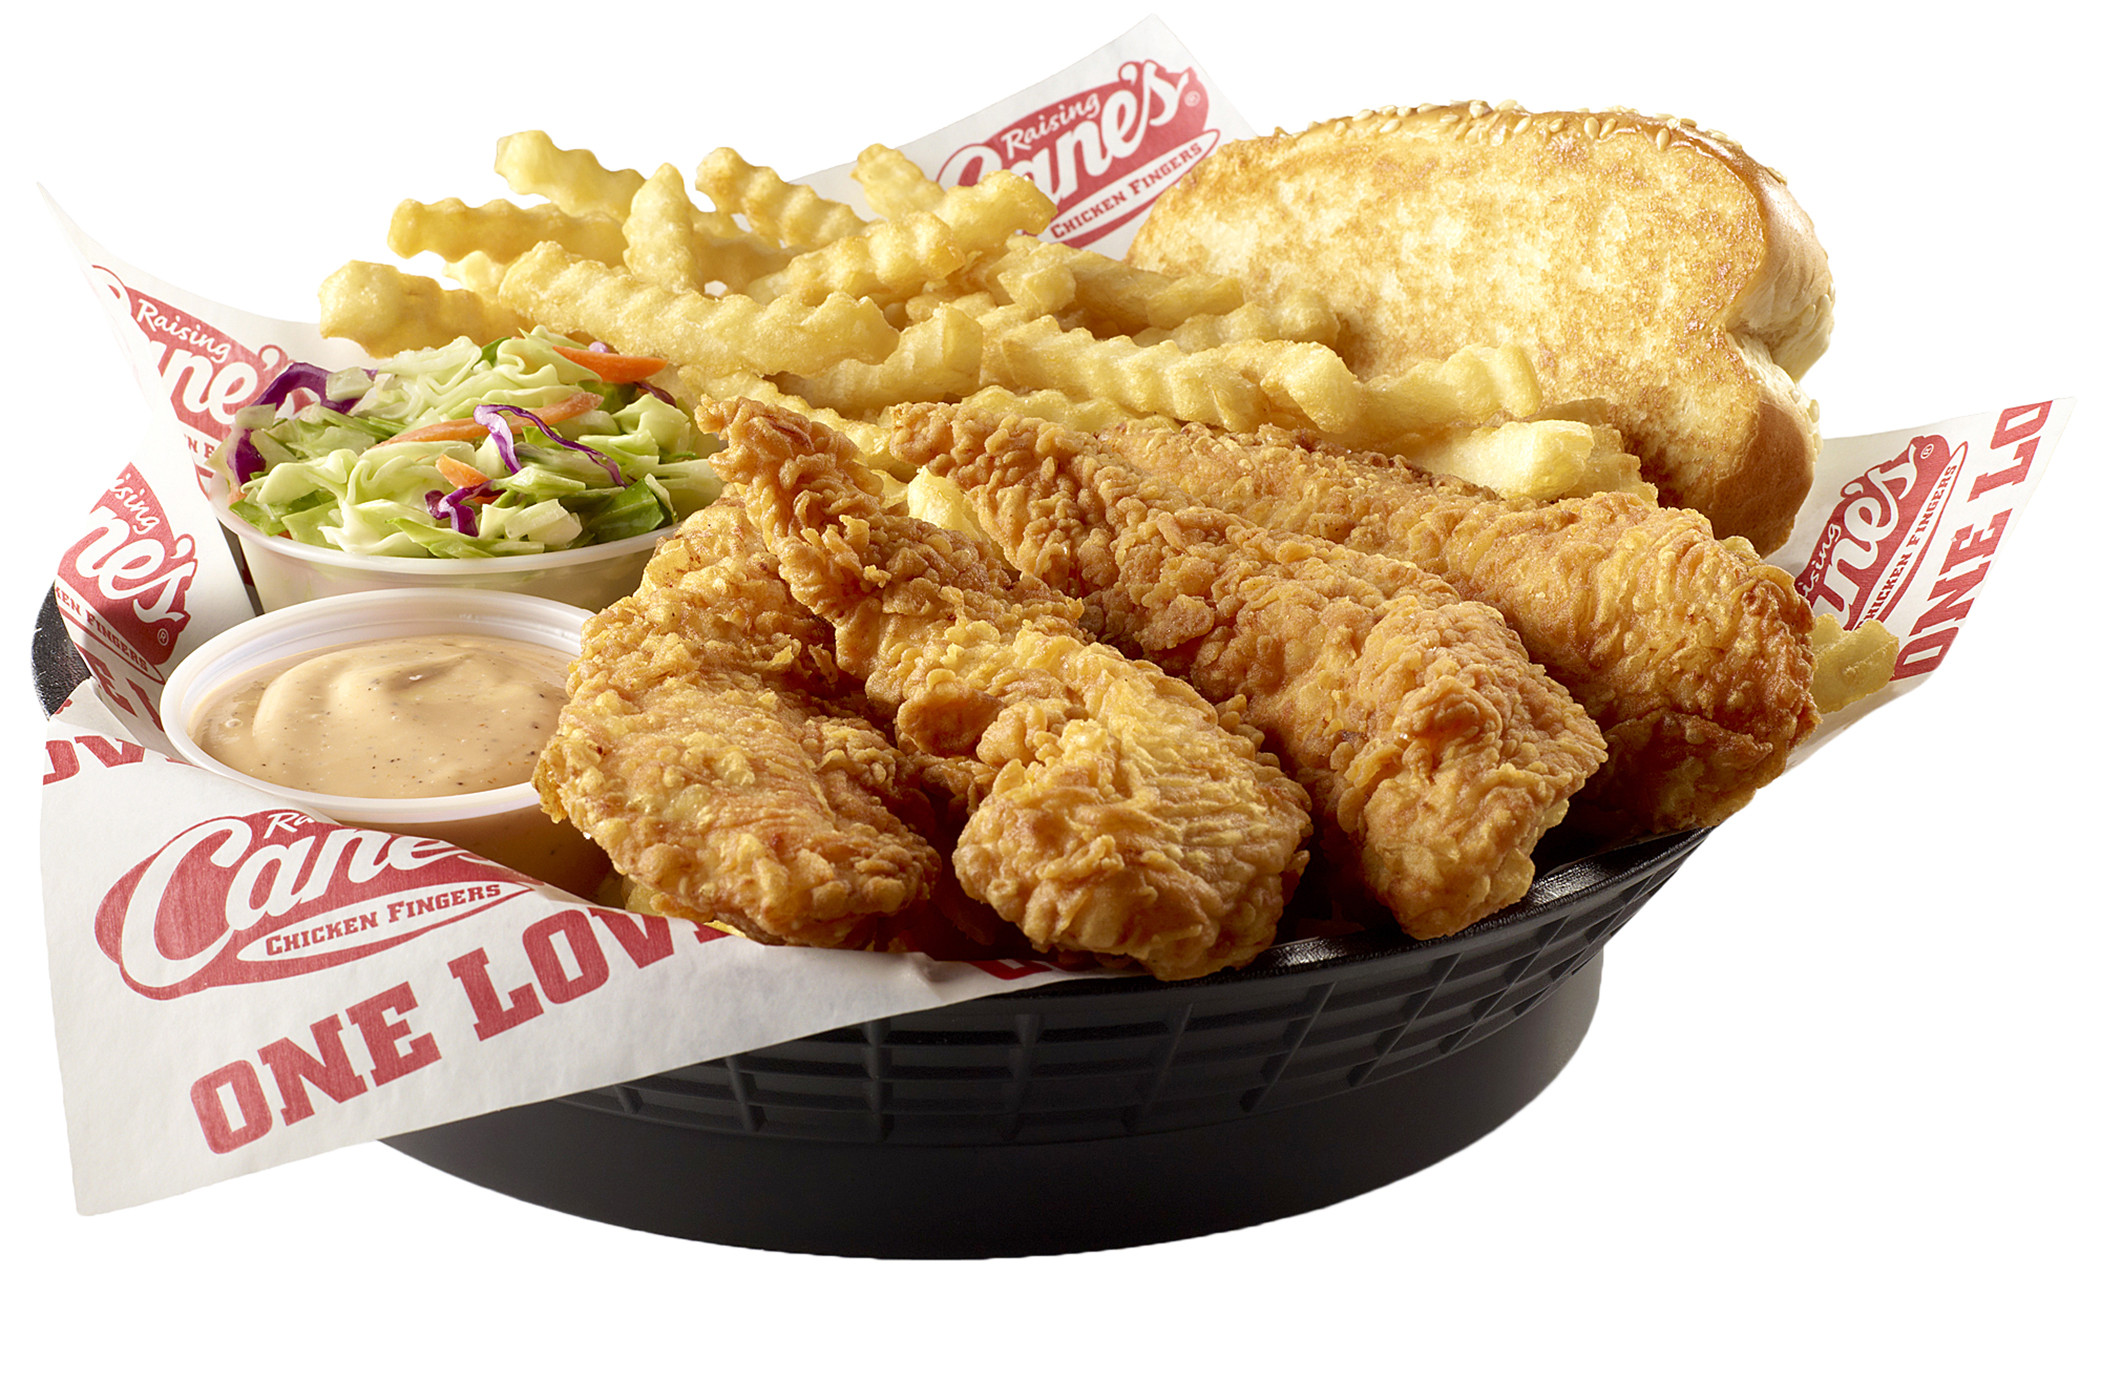 Canes Fried Chicken
 Original recipe fried chicken is a local tradition [225]